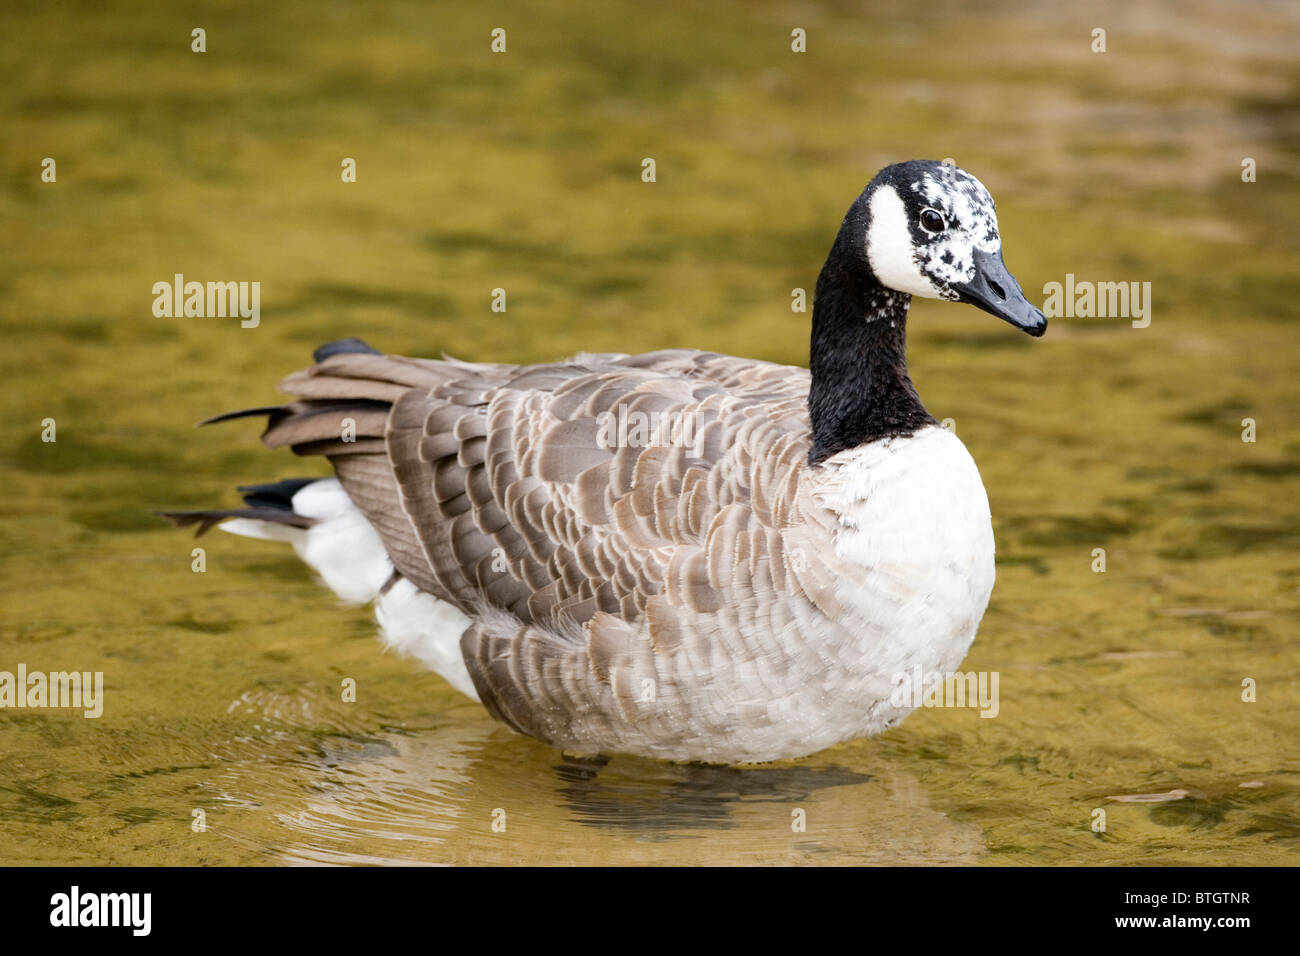 Canada Goose Branta canadensis. Aberrant white plumage on the face and head of an aberrant, individual bird. Stock Photo